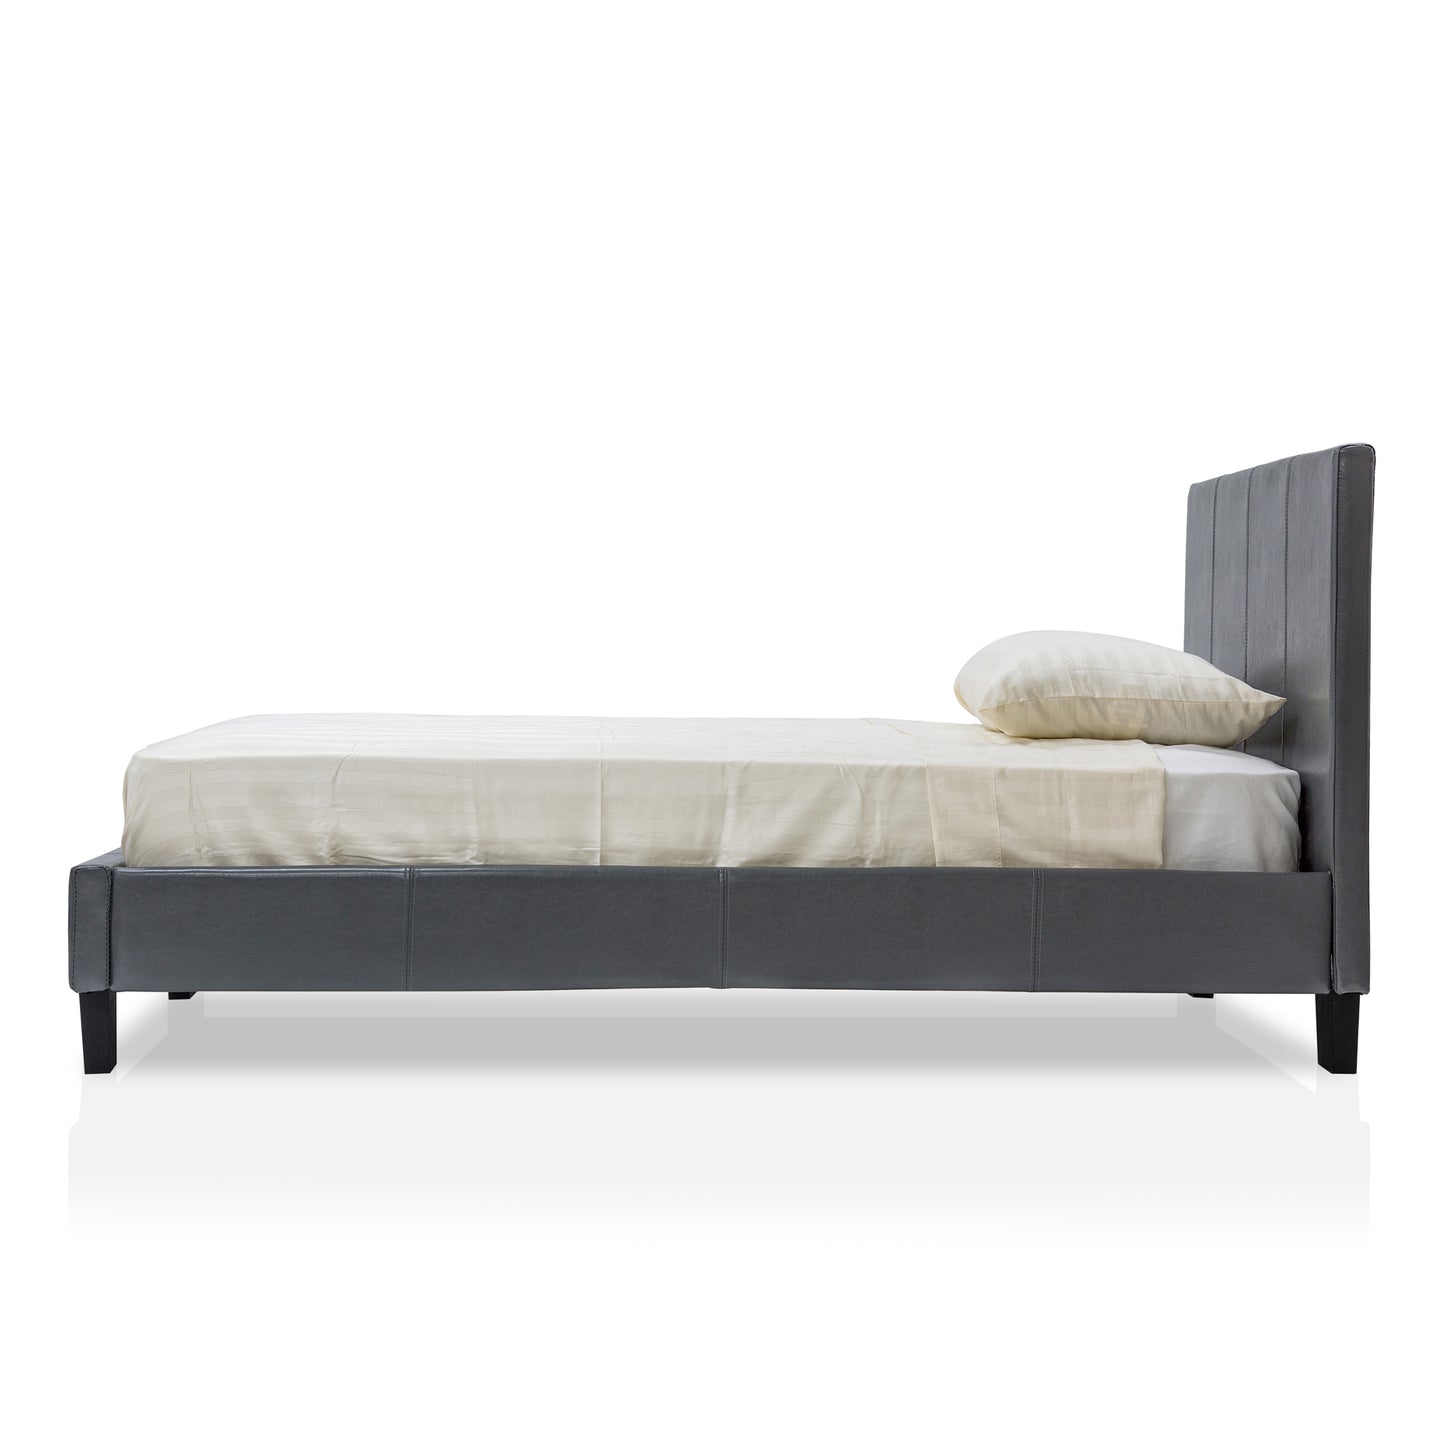 Front-facing side view of a contemporary gray faux leather full platform bed with linens on a white background